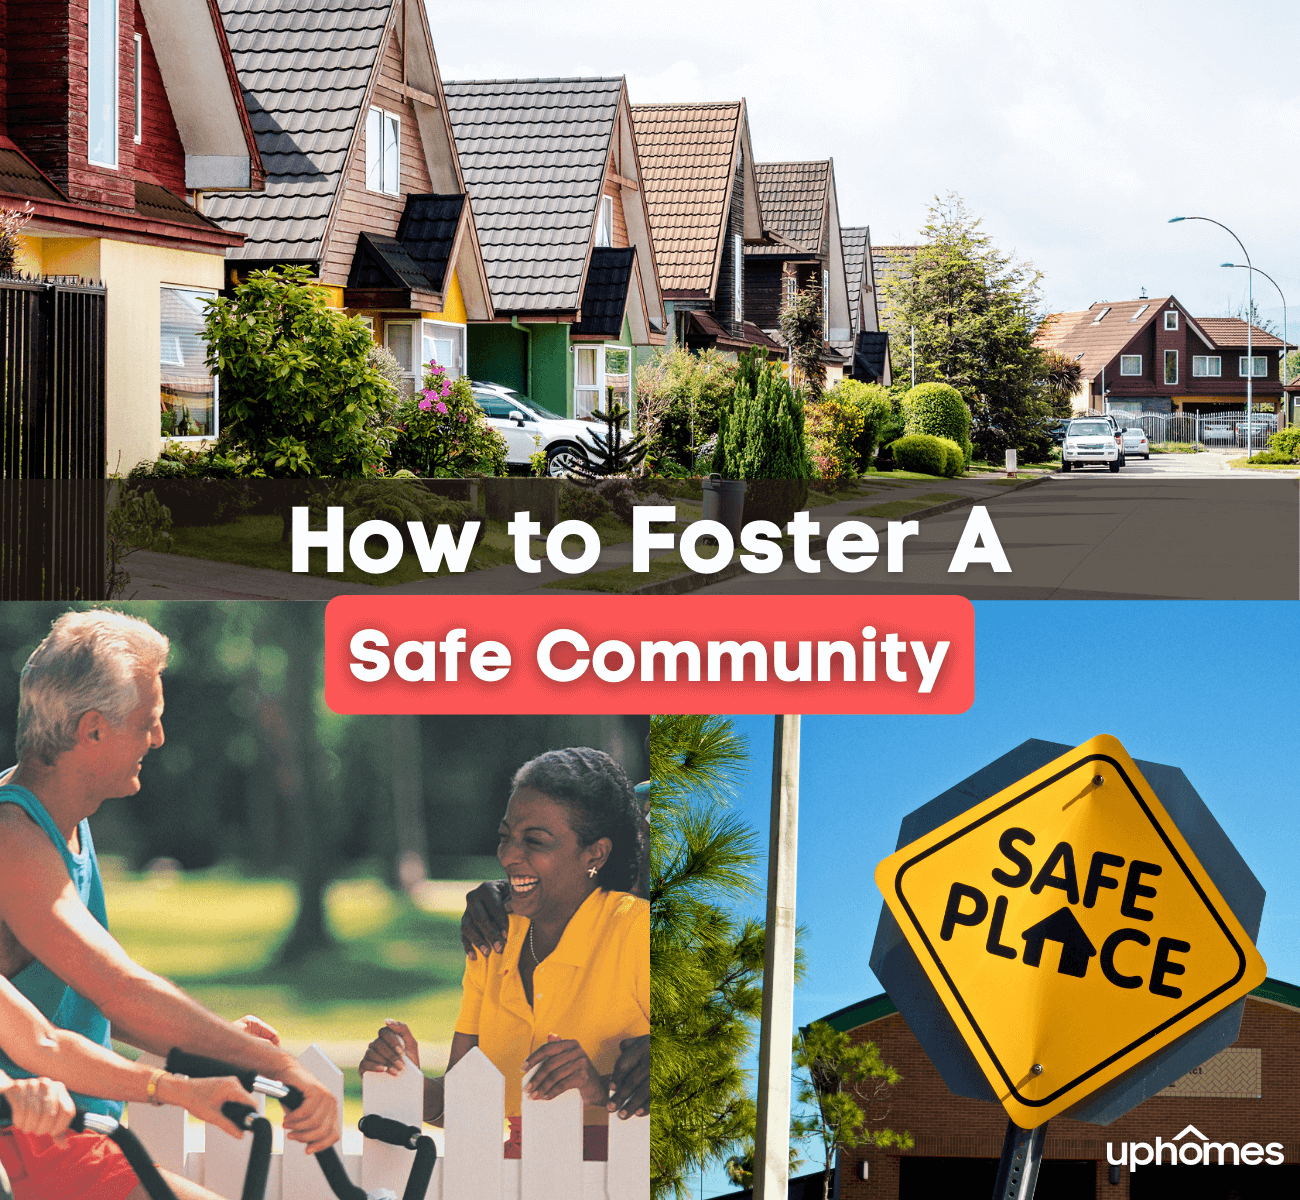 How to Foster a Safe Community and prevent crime in your neighborhood!